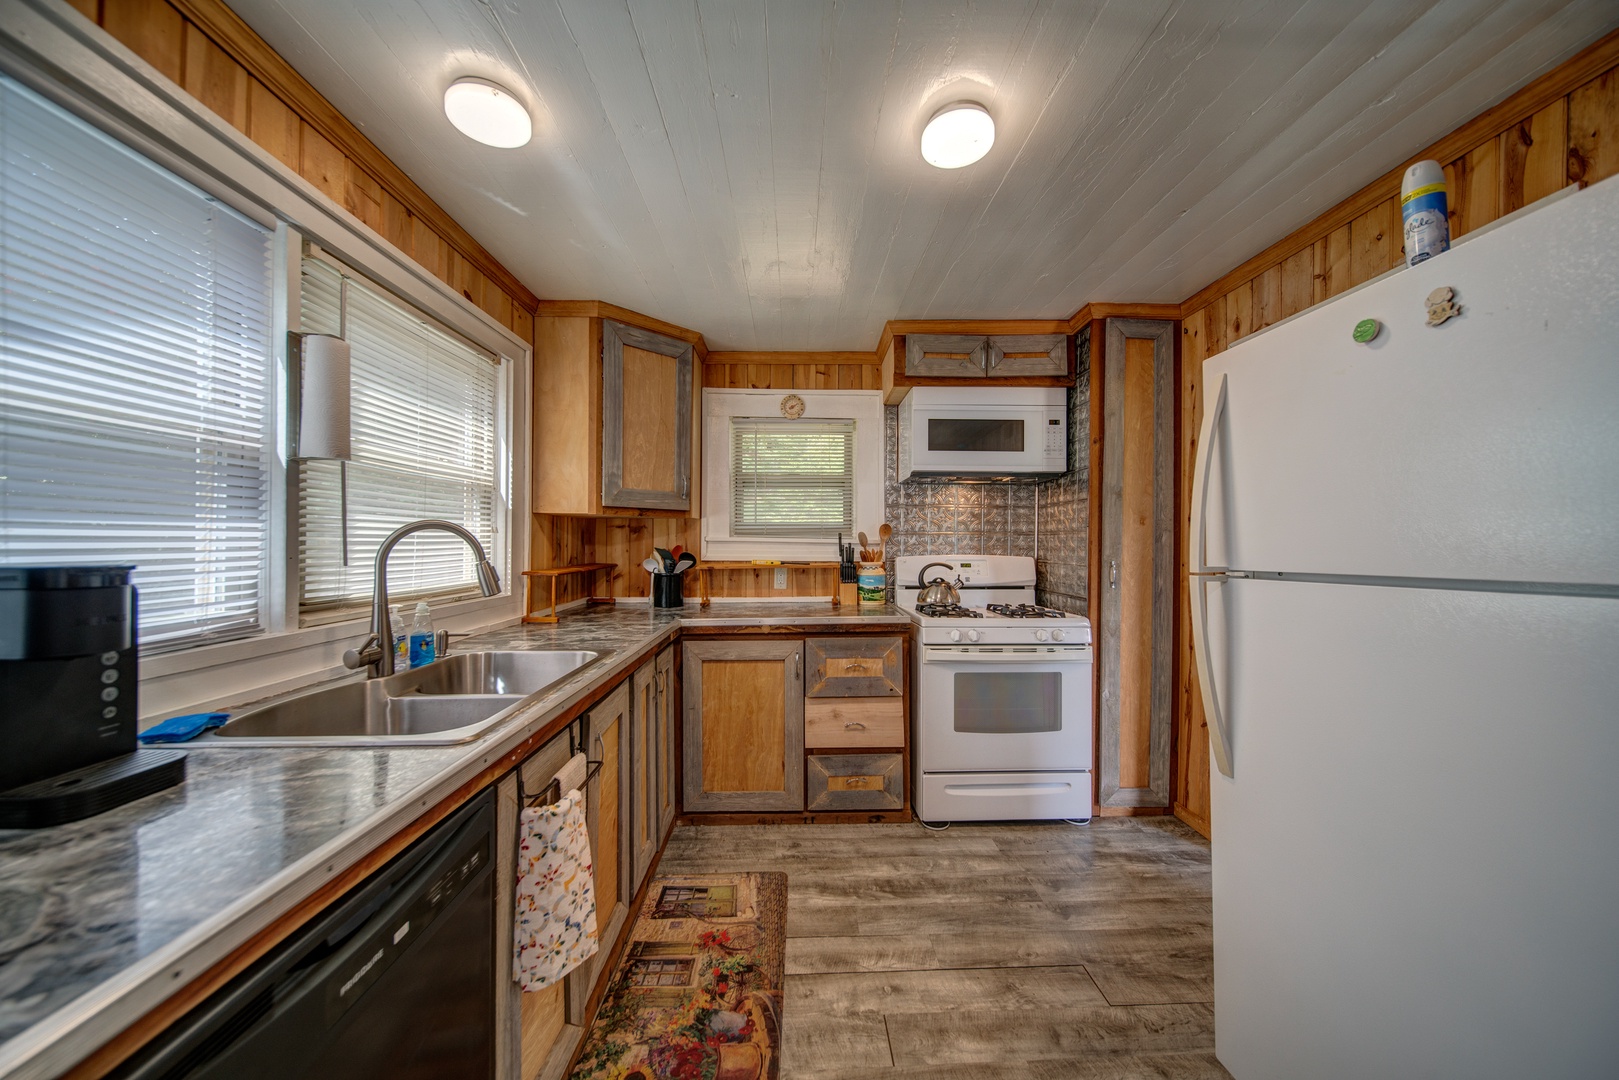 The fully stocked kitchen offers ample space & all the comforts of home